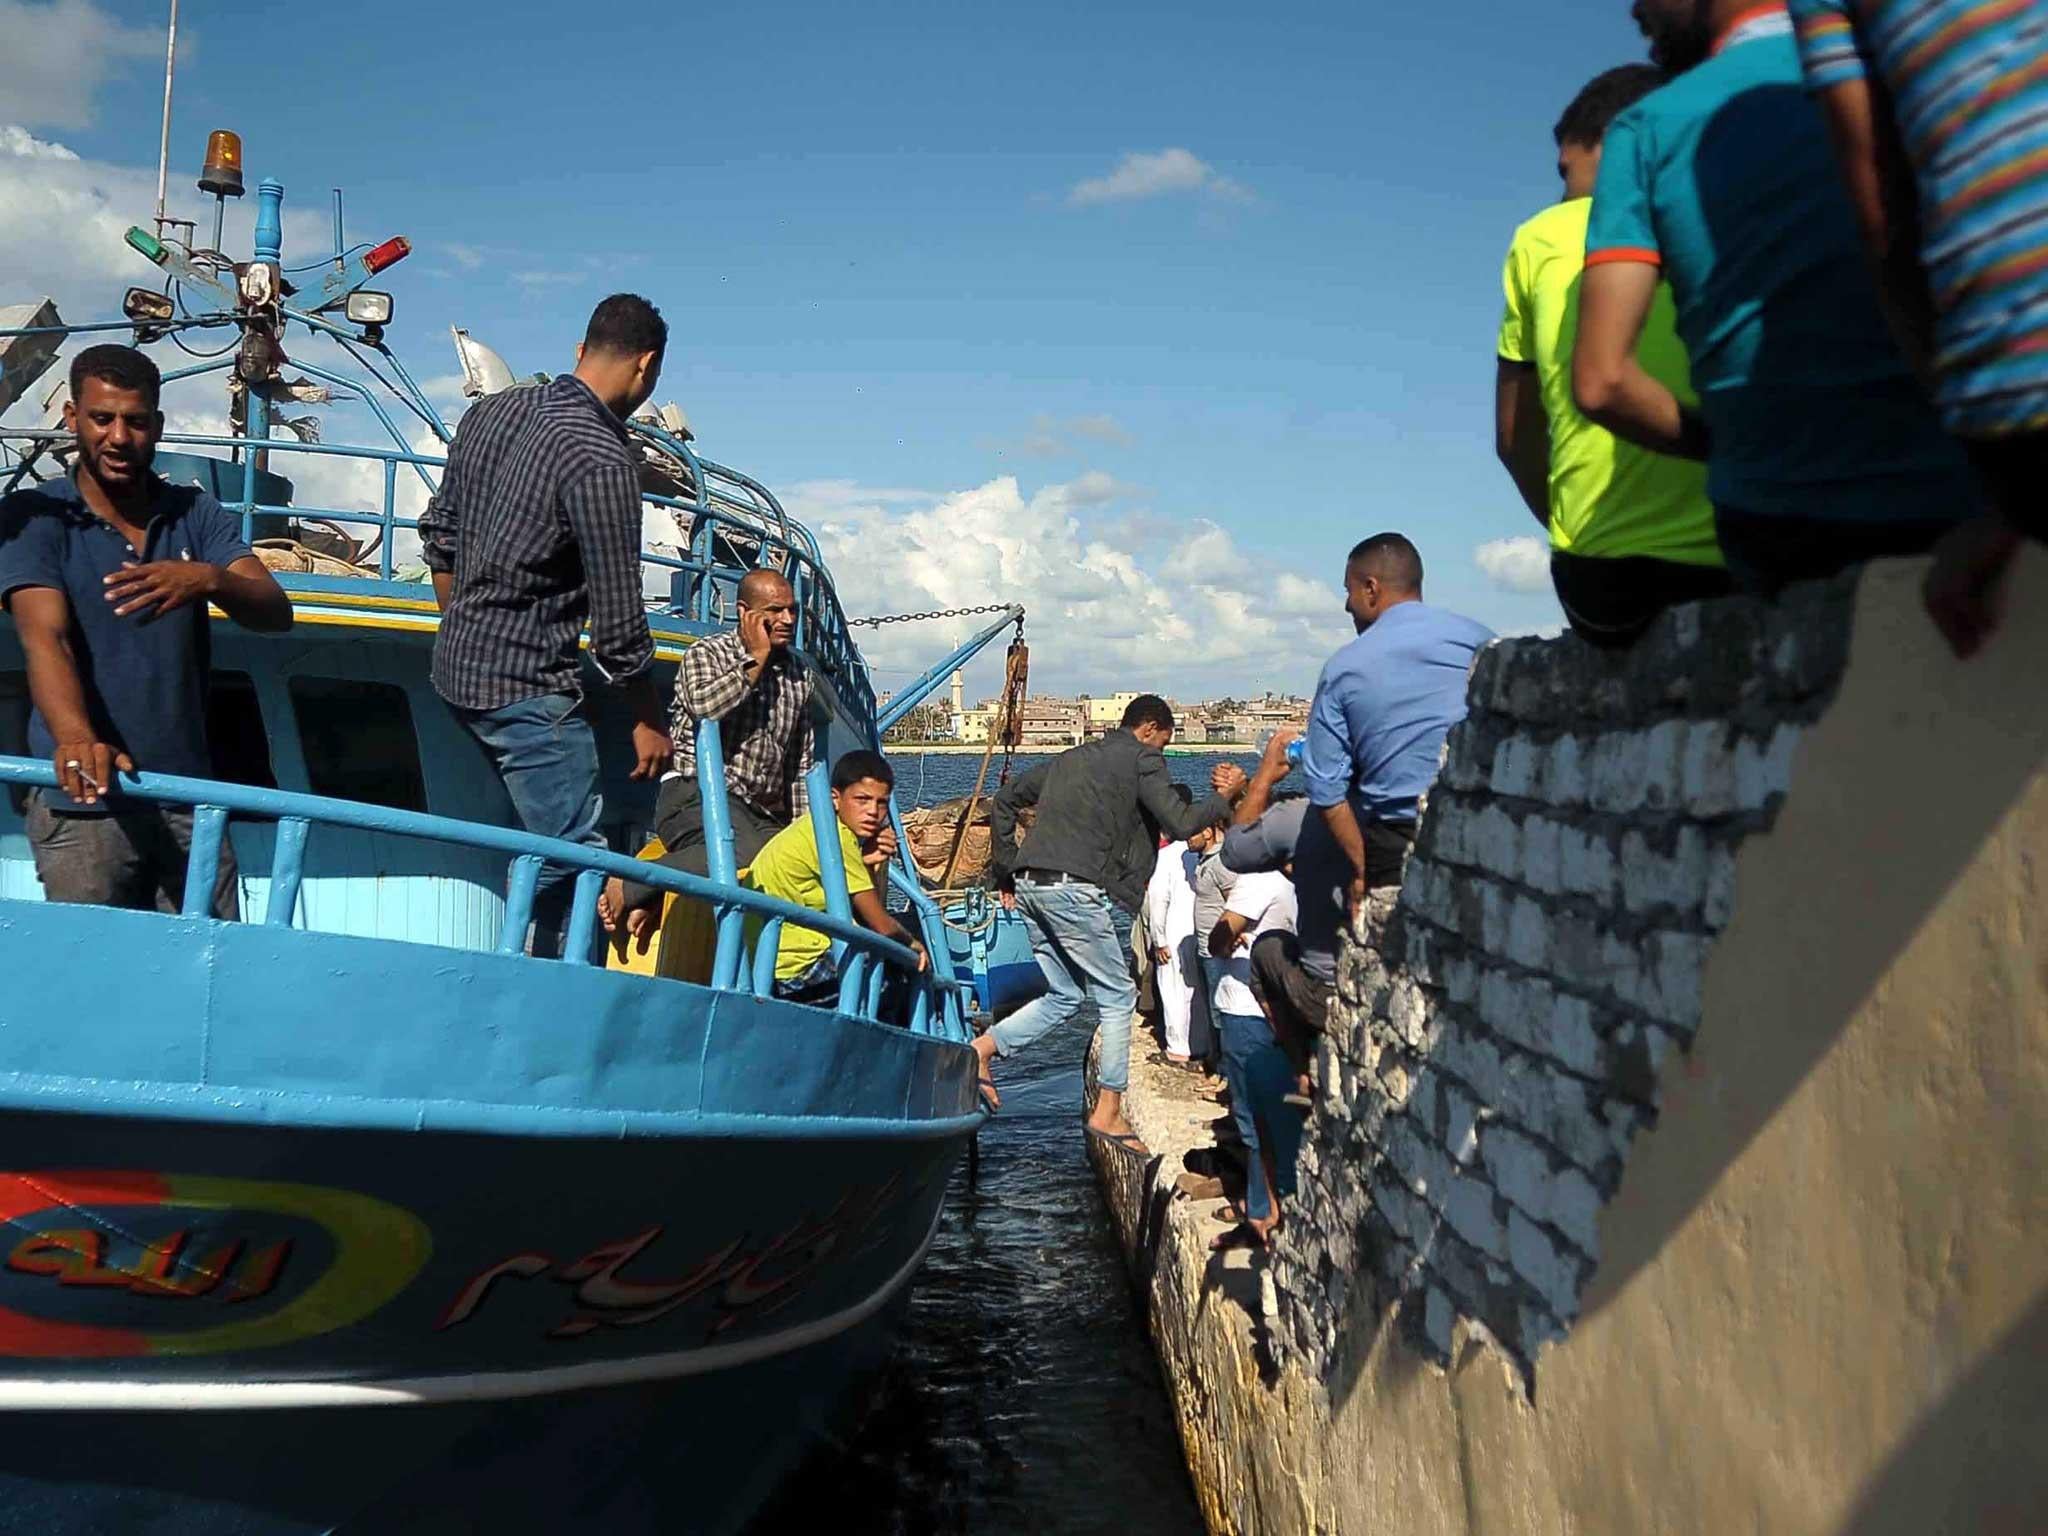 A boat carrying rescue teams returns to the shore at the port city of Rosetta, Egypt